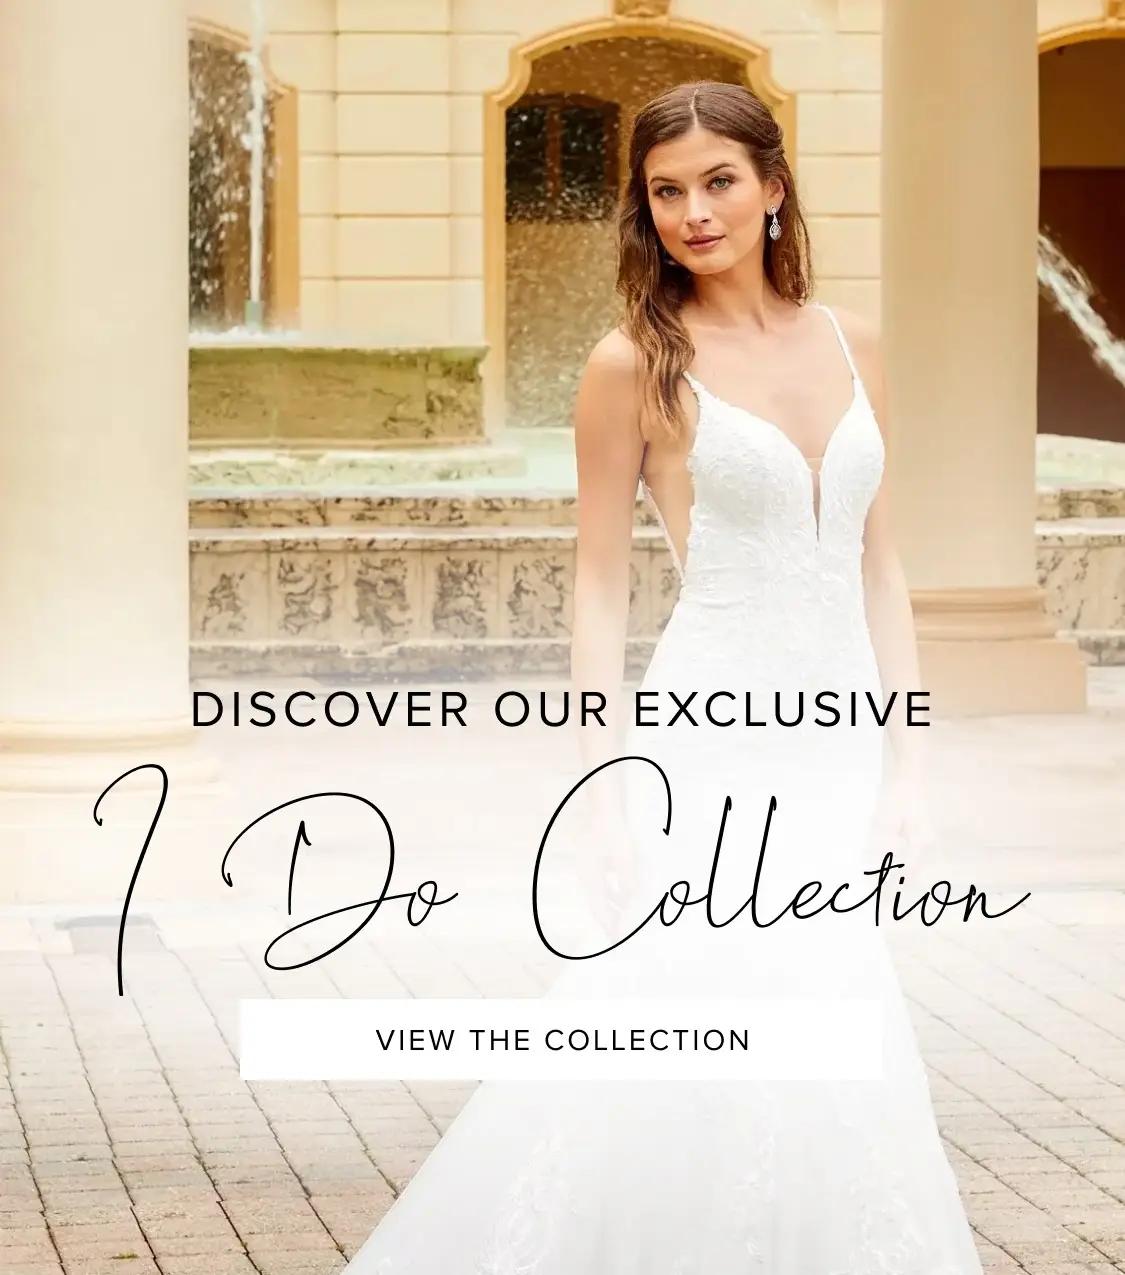 Mobile I Do Collection Banner